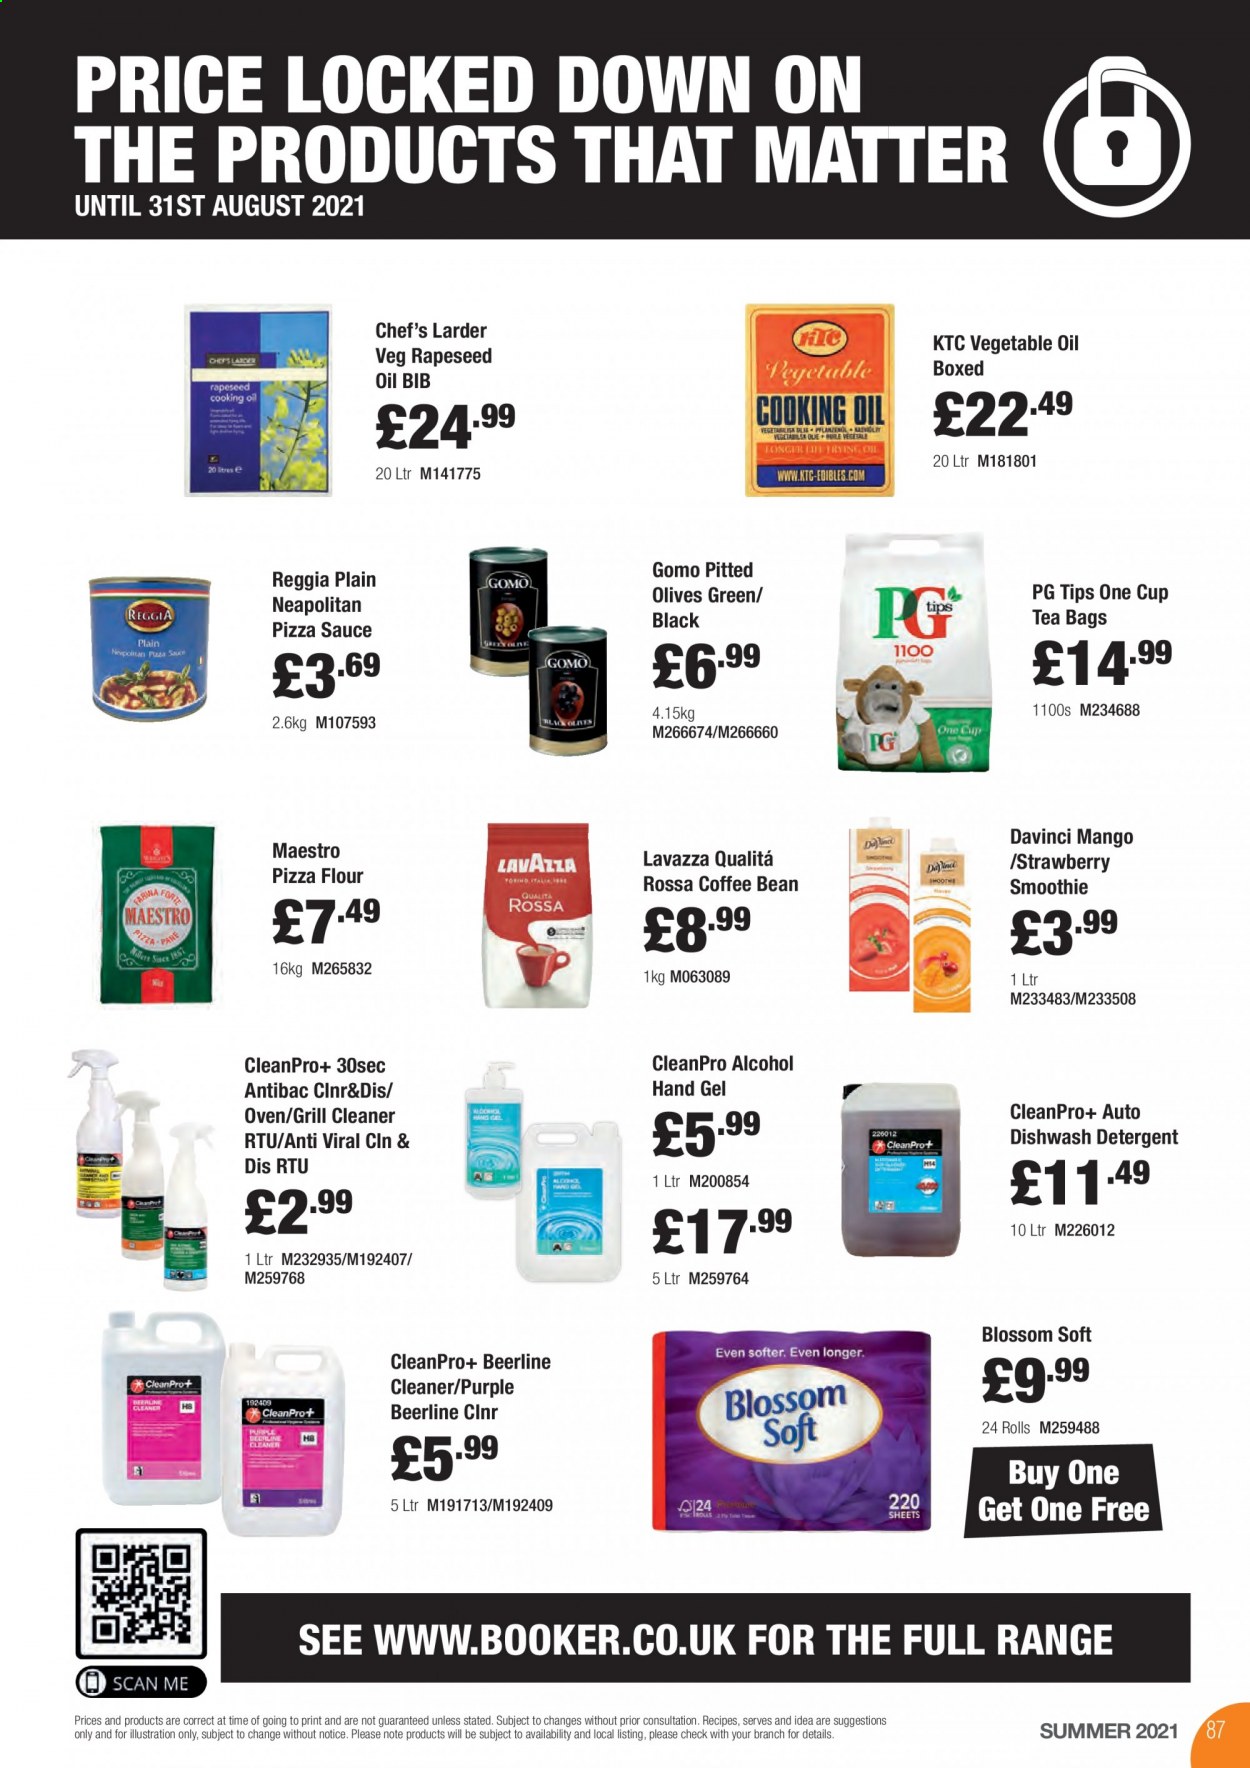 Makro offer  - 17.8.2021 - 31.8.2021 - Sales products - alcohol, mango, sauce, Blossom, flour, olives, vegetable oil, oil, smoothie, tea bags, Lavazza, coffee, detergent, cleaner, dishwashing liquid, hand gel, cup. Page 87.